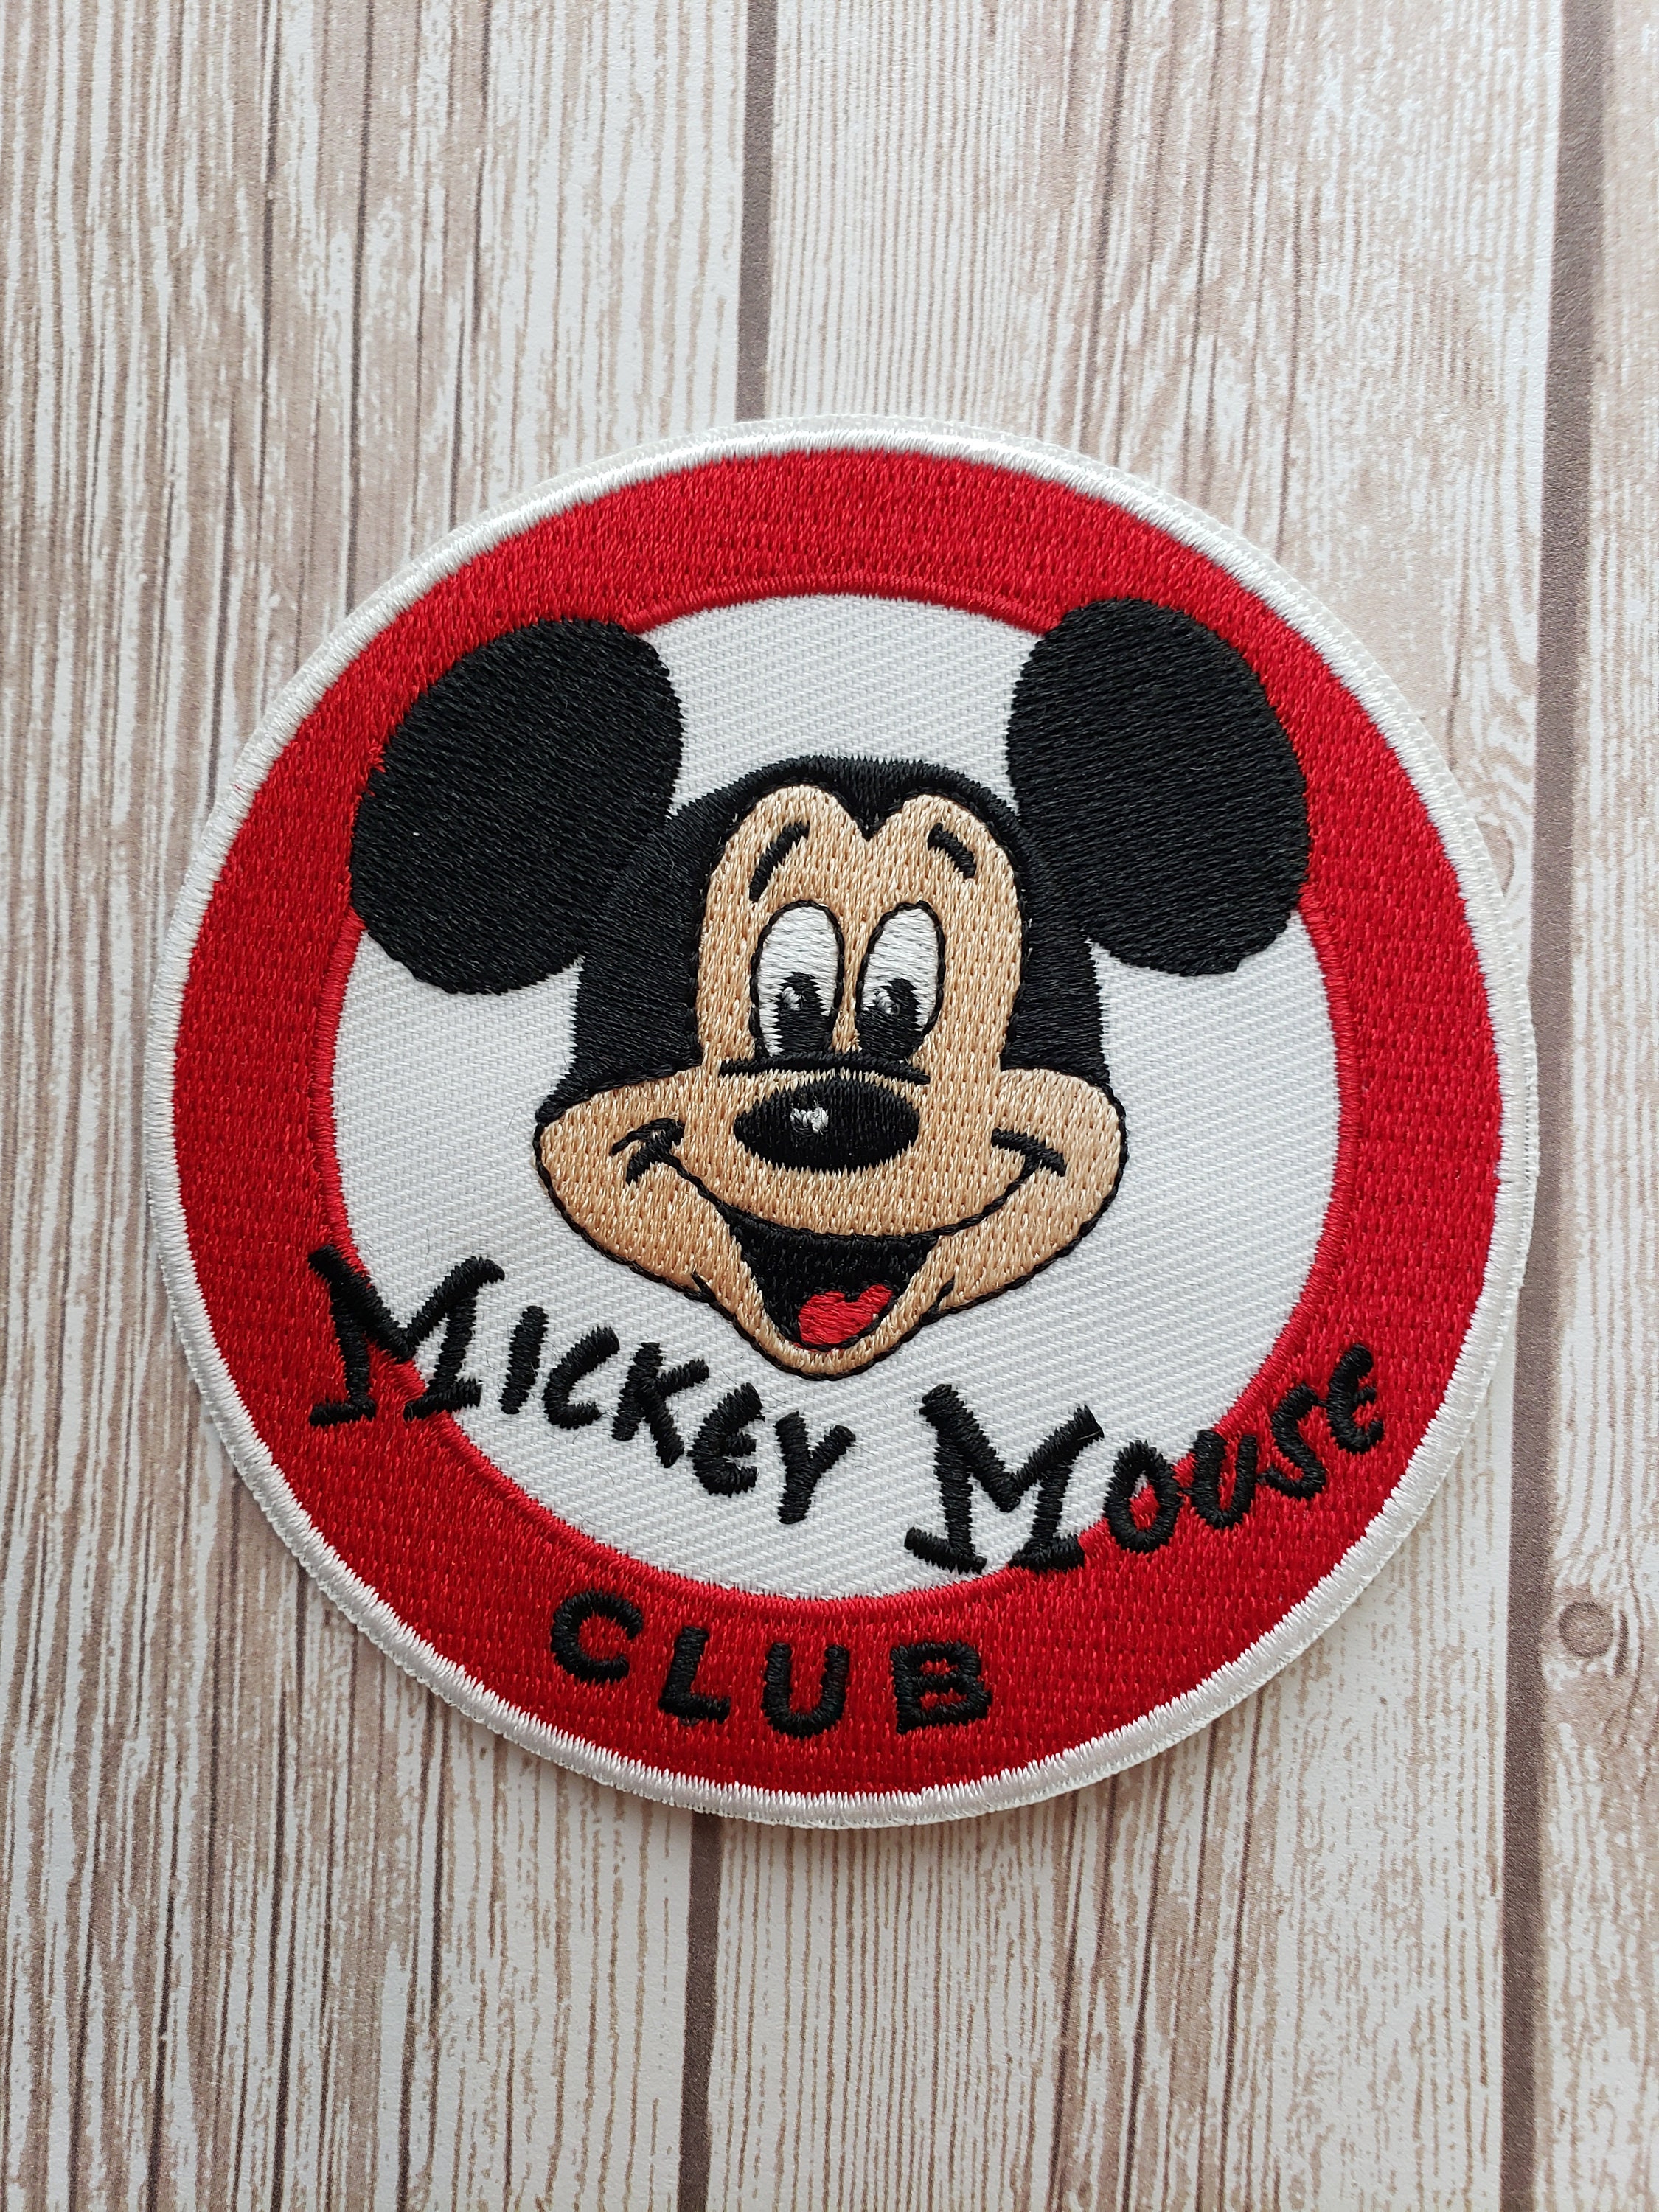 The Mickey Mouse Club 50th Anniversary Patch